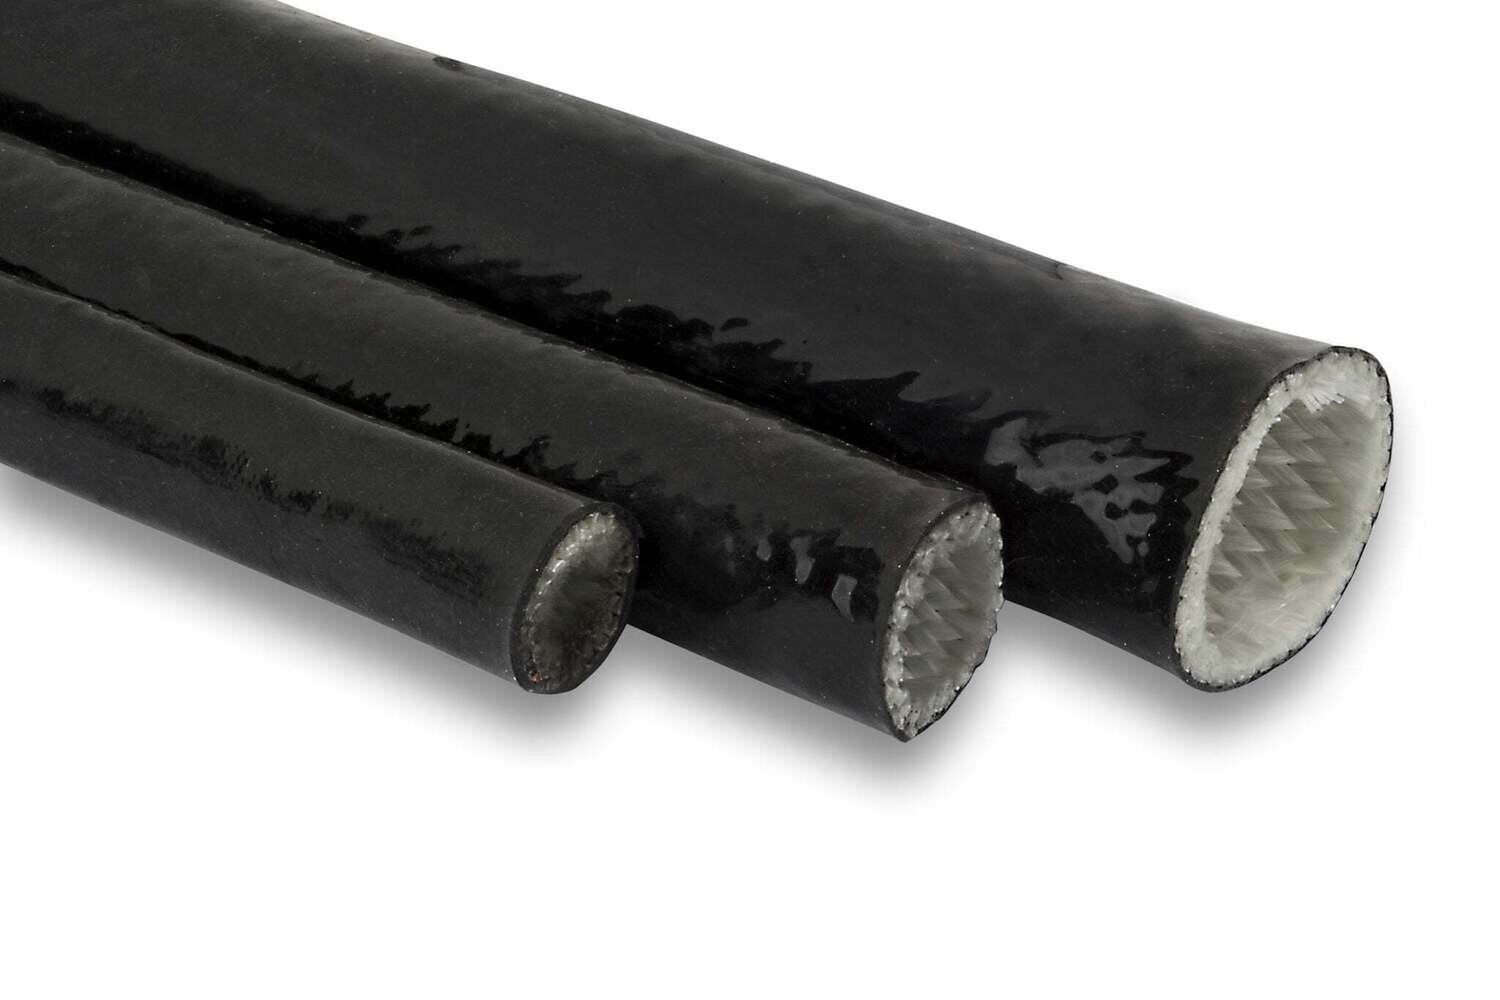 Black Silicon High Heat Sleeve - AN4 (Utilises 7mm Sleeving), 2.0m Multiple Qty will come on a continuous Roll